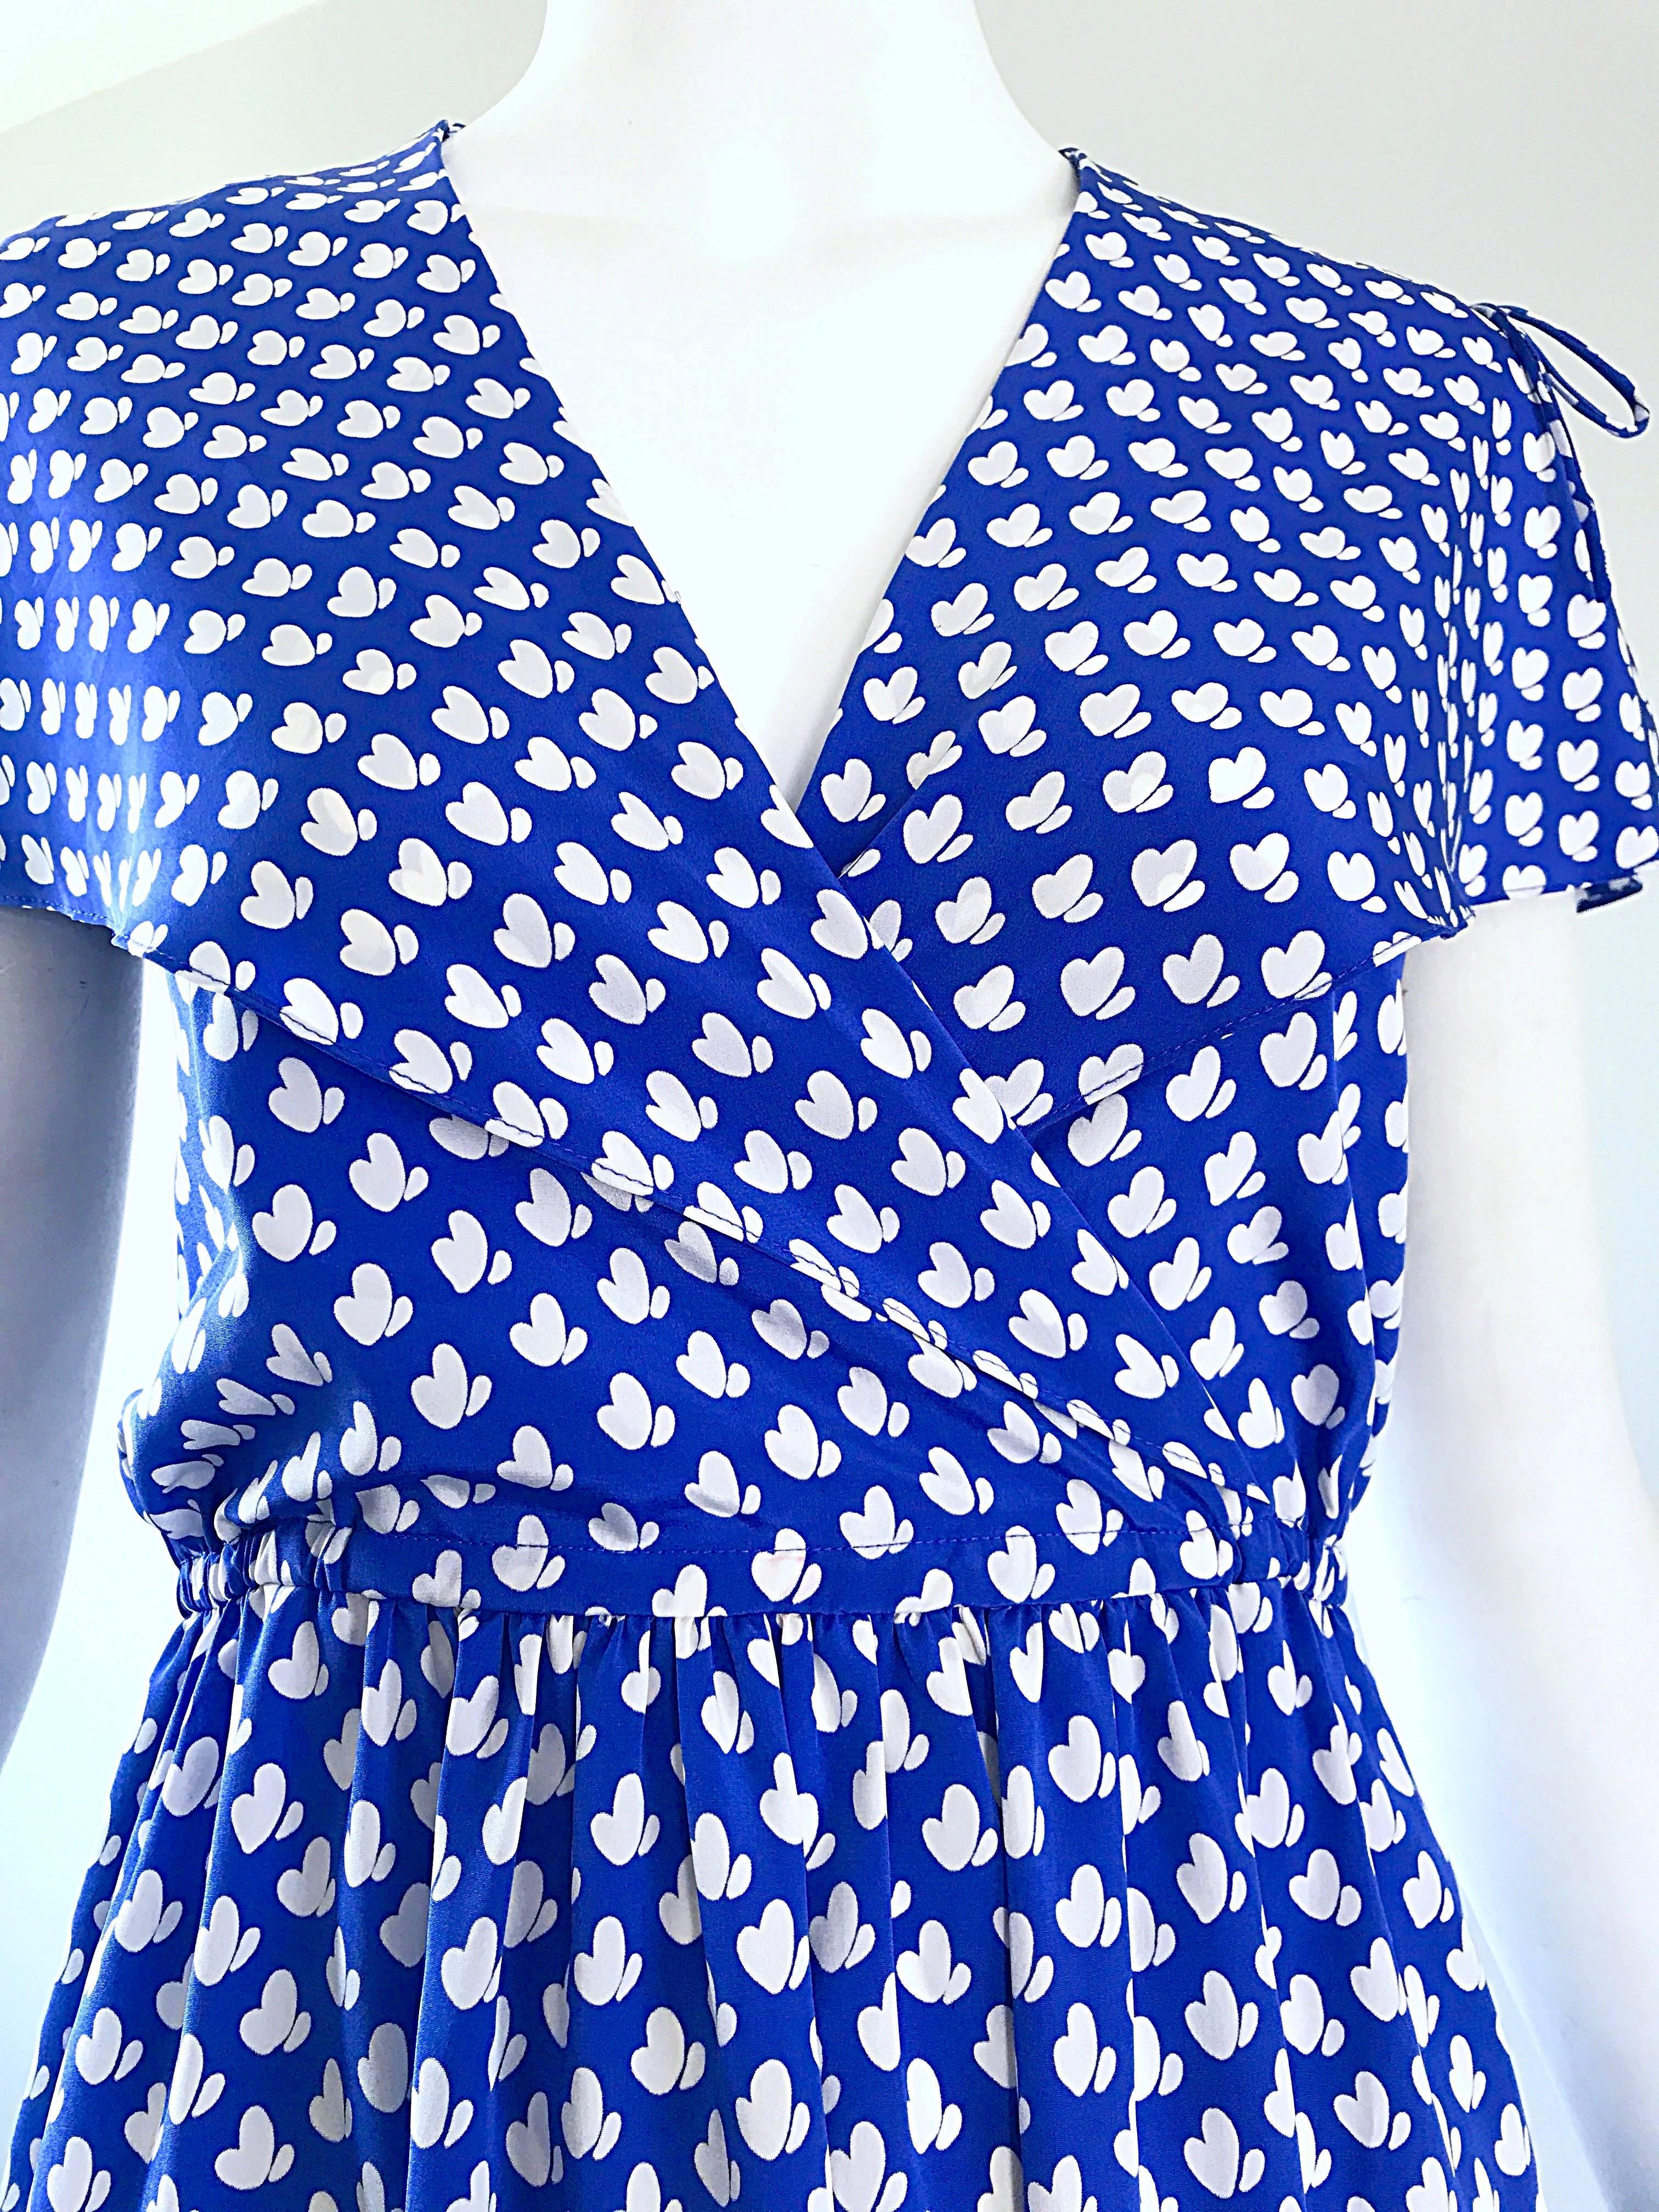 Flirty late 1970s PIERRE CARDIN for NEIMAN MARCUS royal blue and white heart print flutter sleeve dress! Features a blue background with white hearts printed throughout. Elastic waistband stretches to fit, with pockets at each side of the hips.